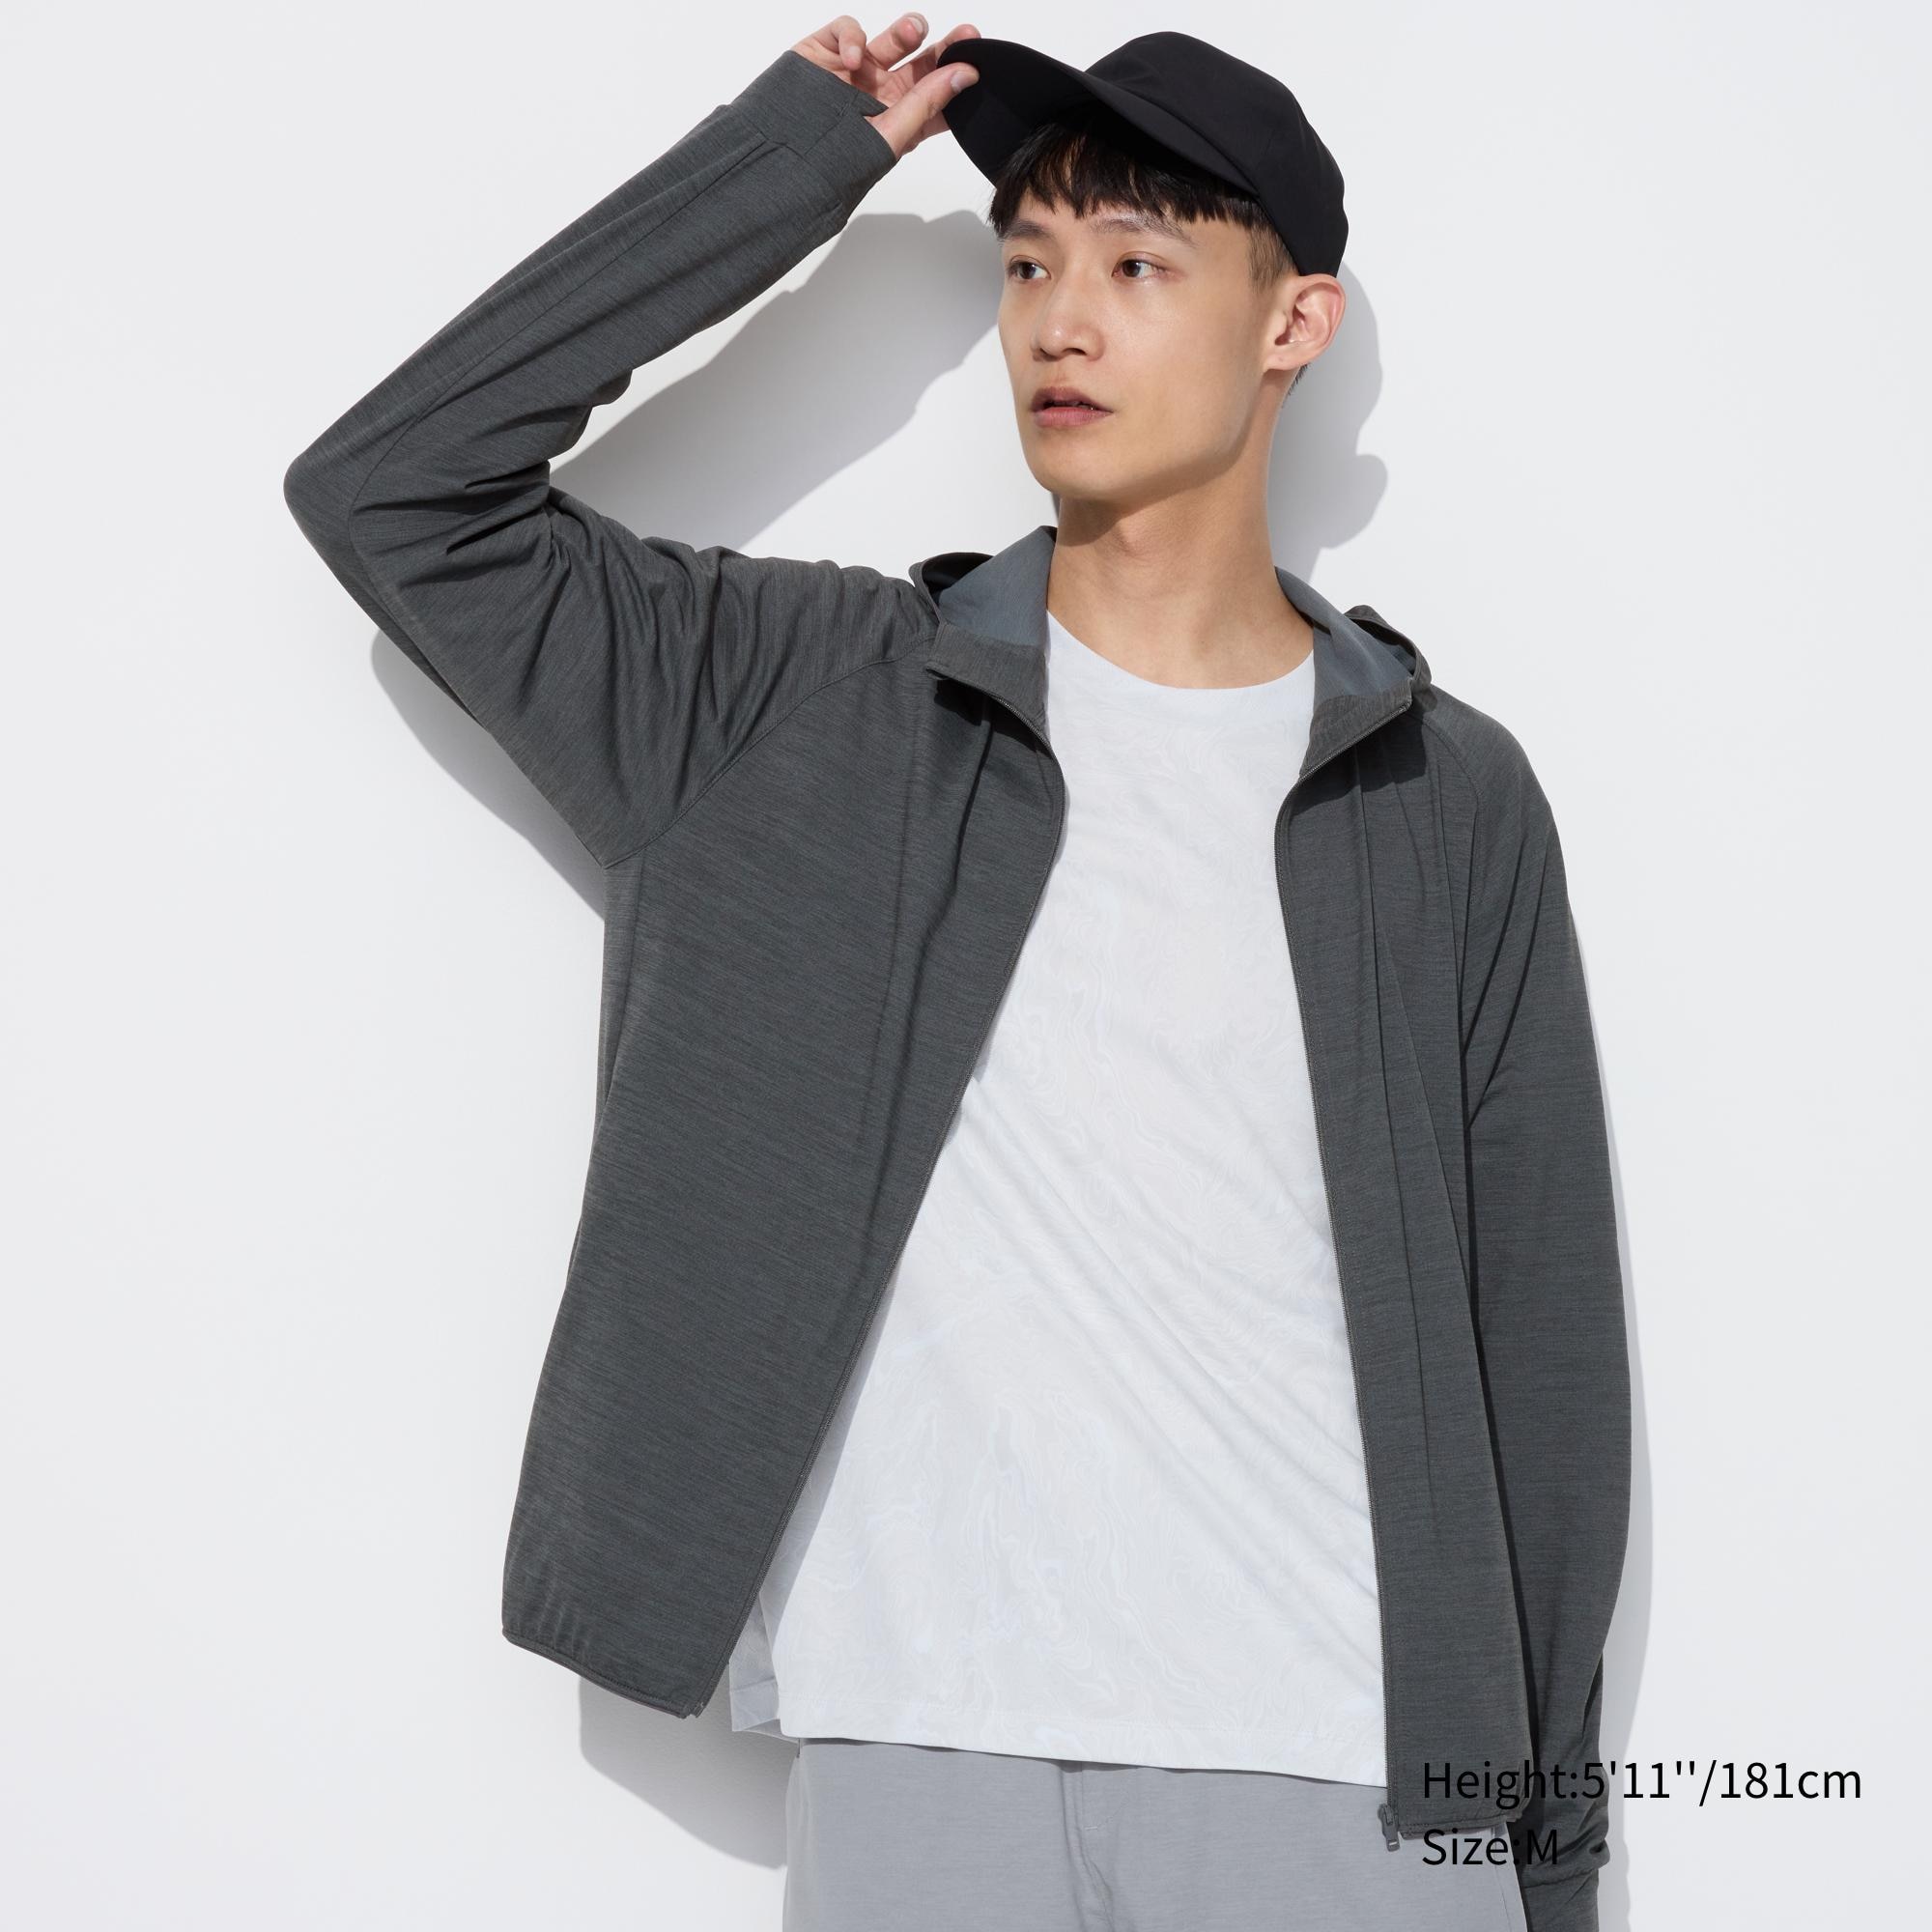 Uniqlo Ultra Stretch Dry Sweat Hoodie - Shopping With Moh